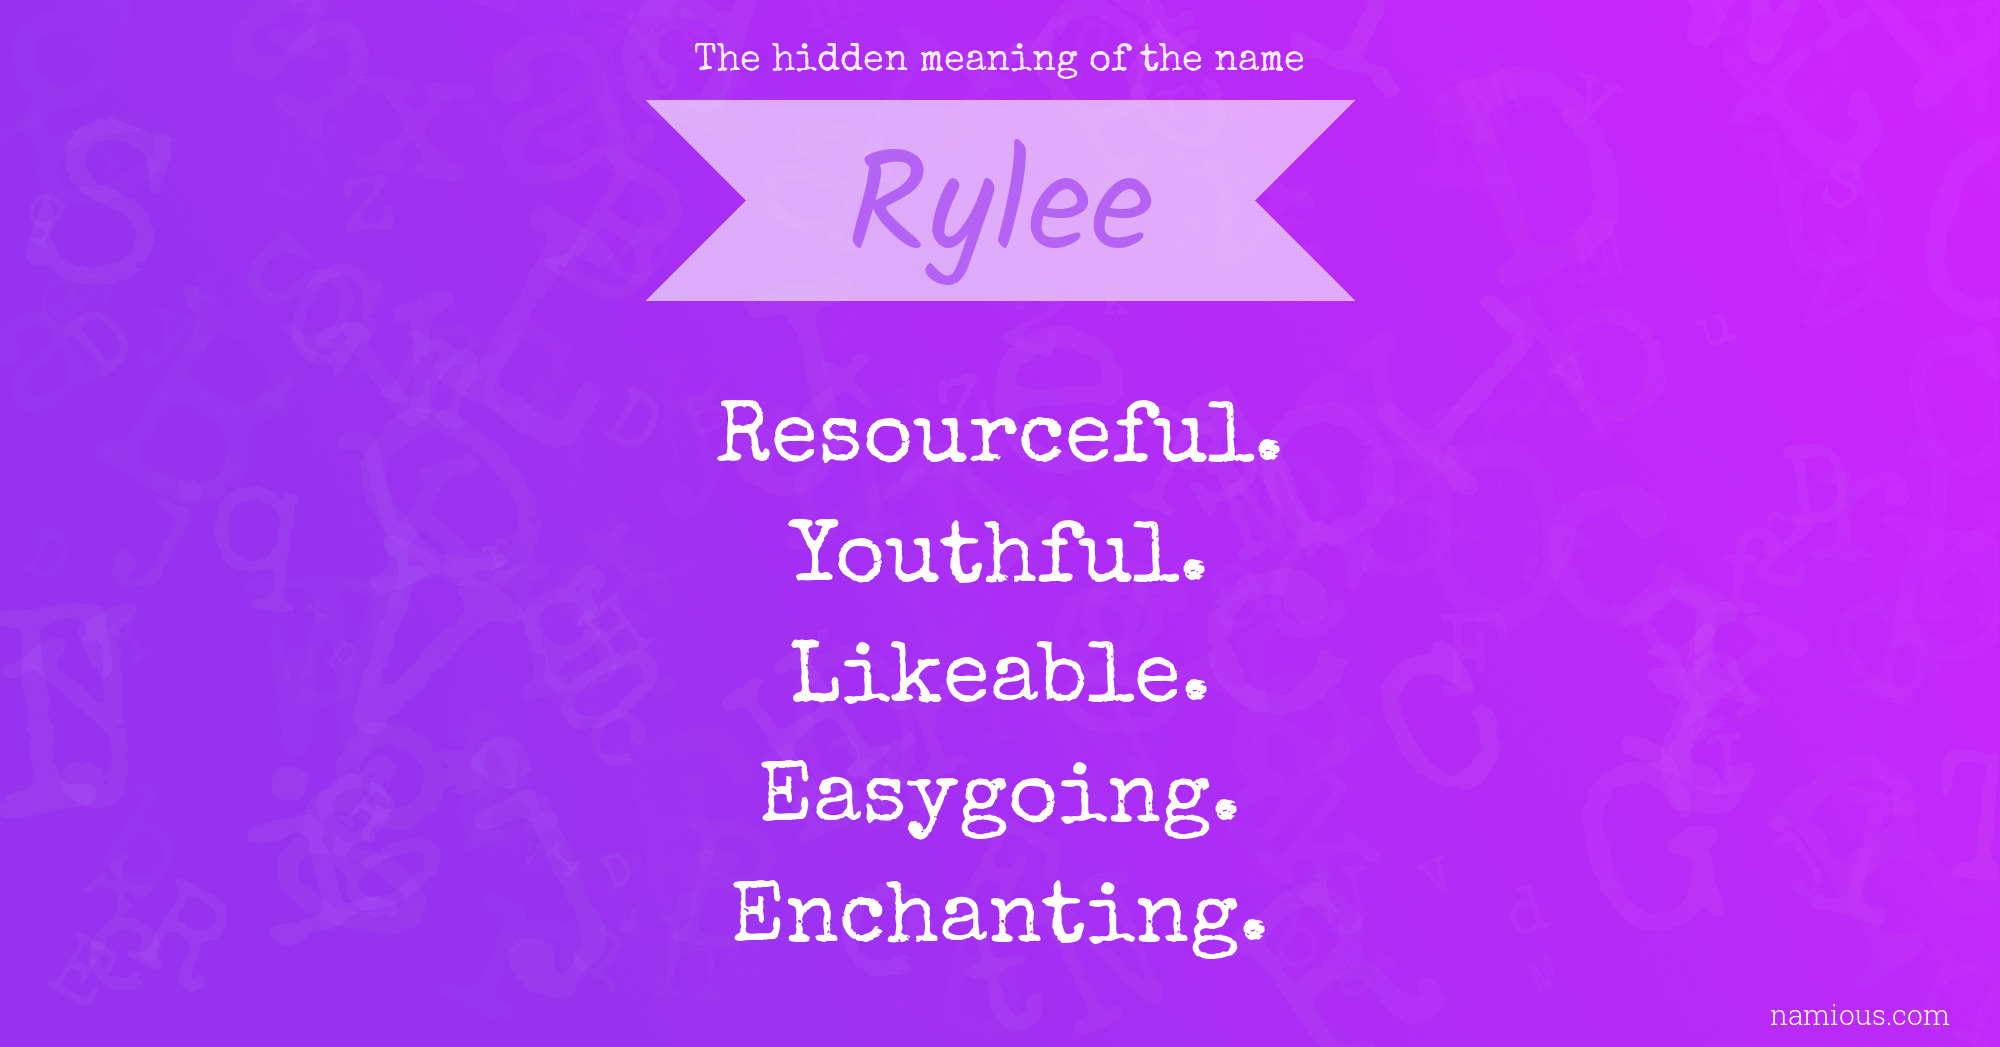 The hidden meaning of the name Rylee